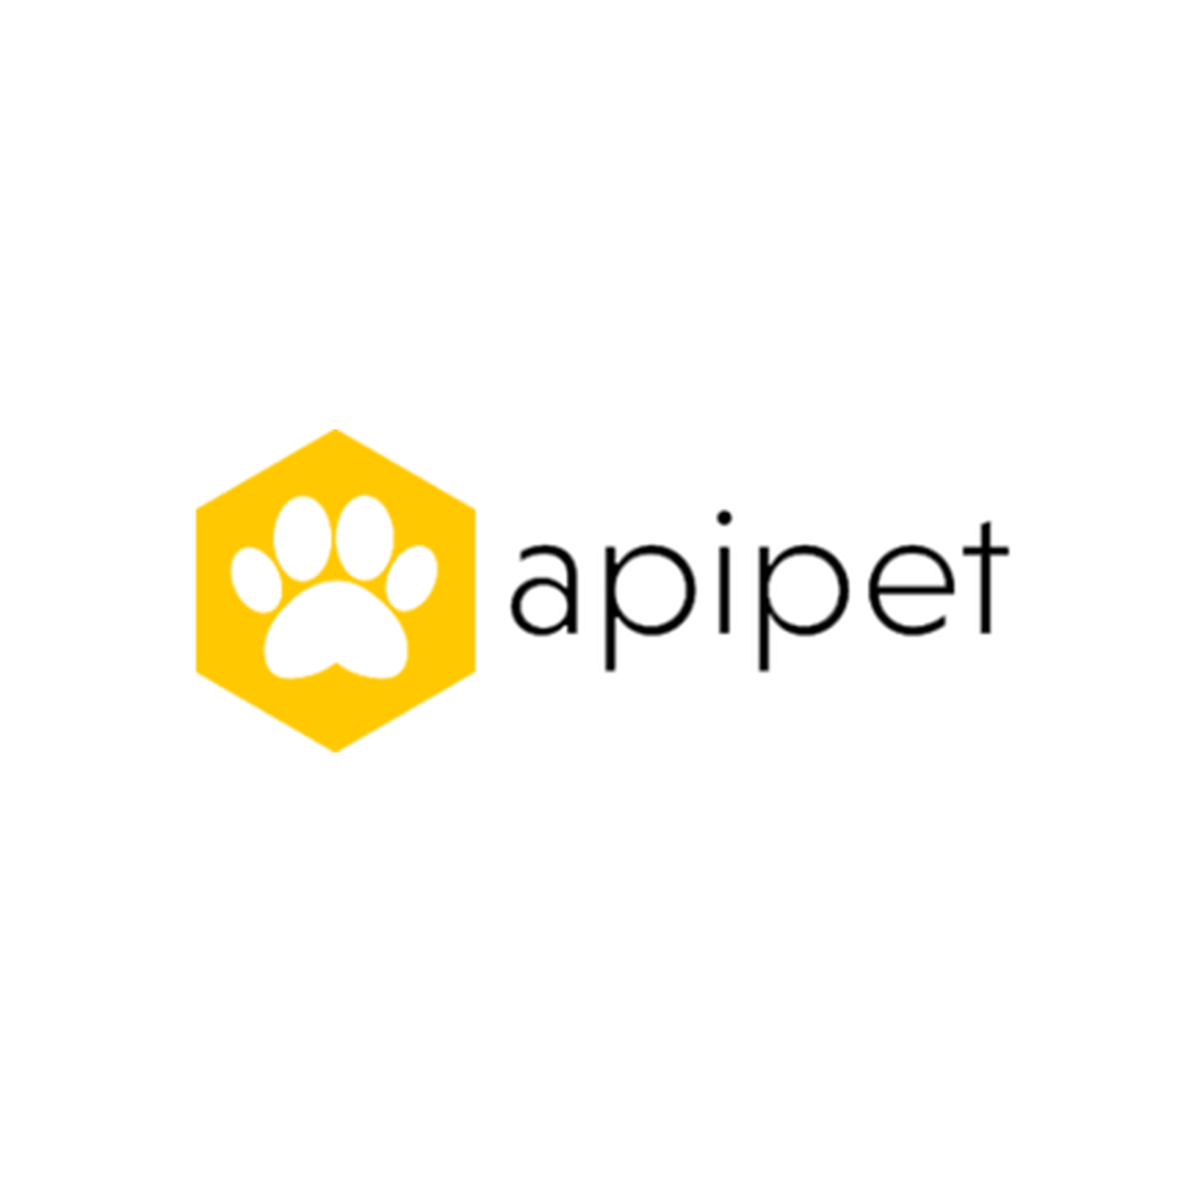 Apipet